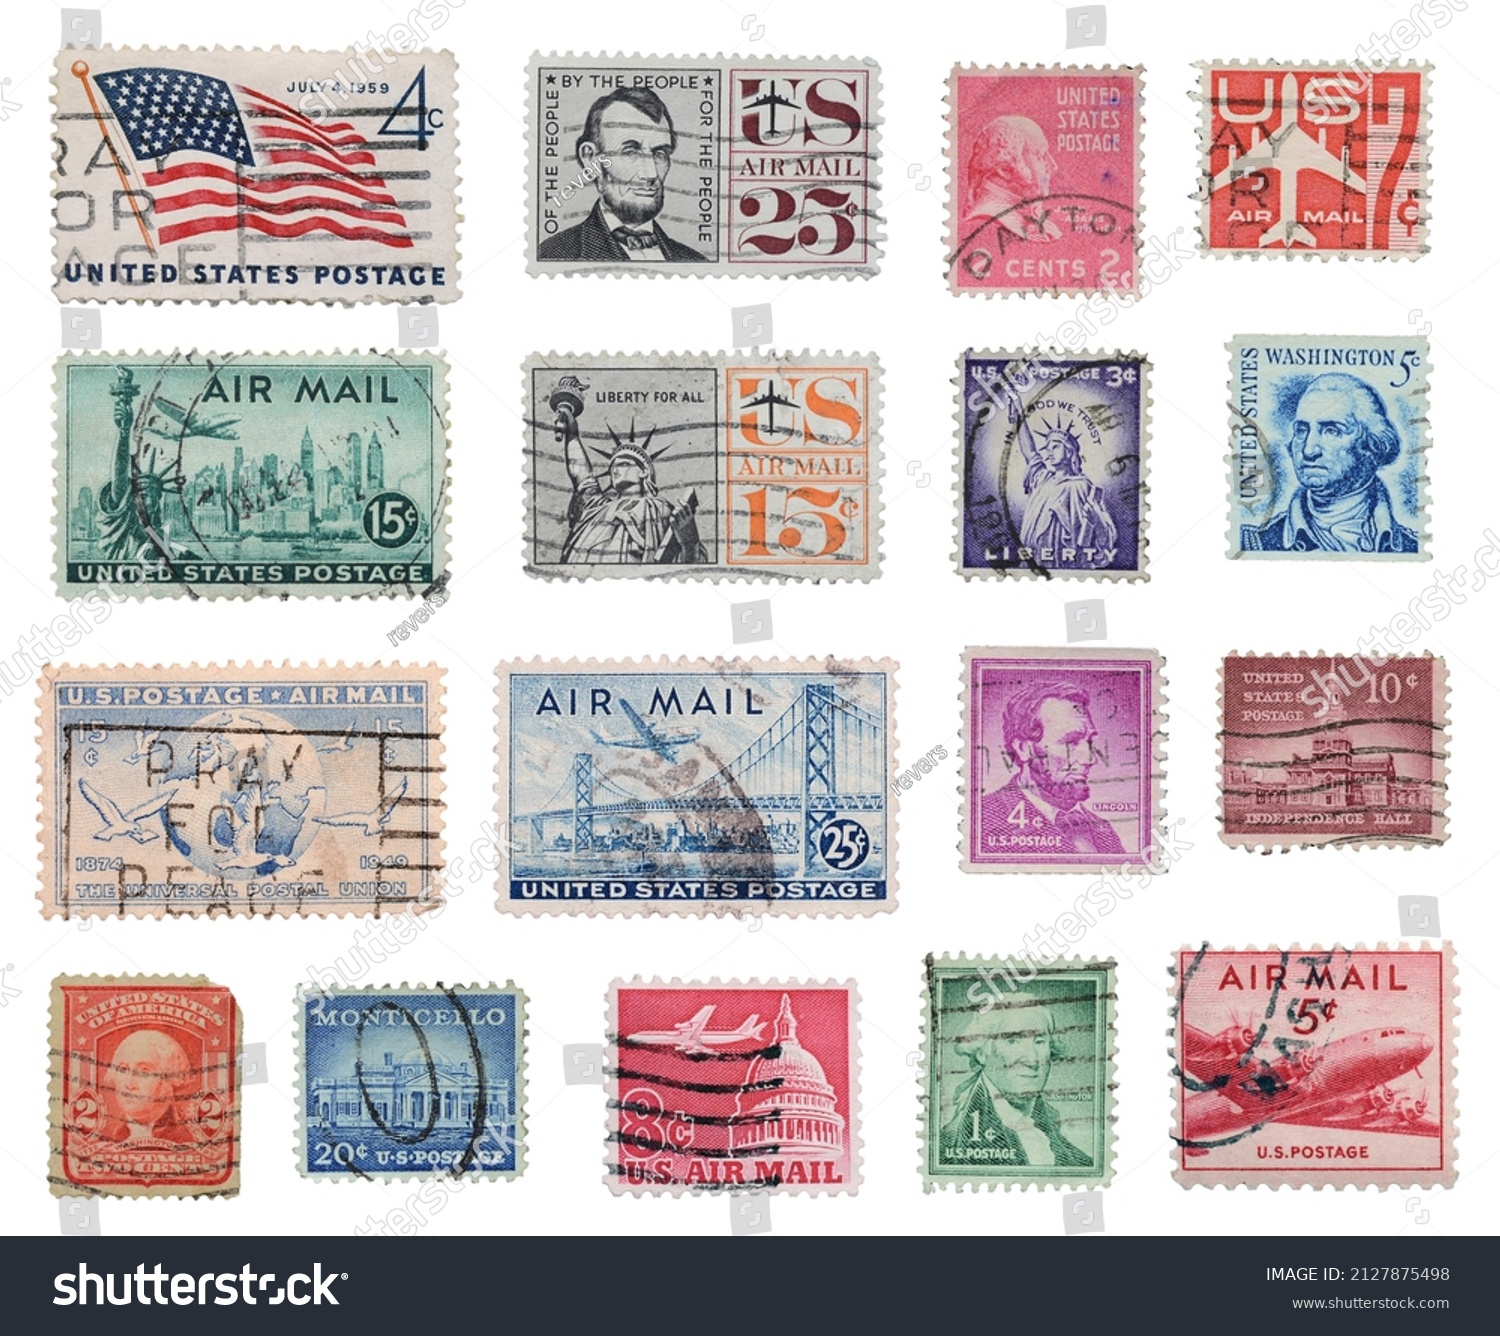 United States of America postage stamps isolated on a white background. #2127875498